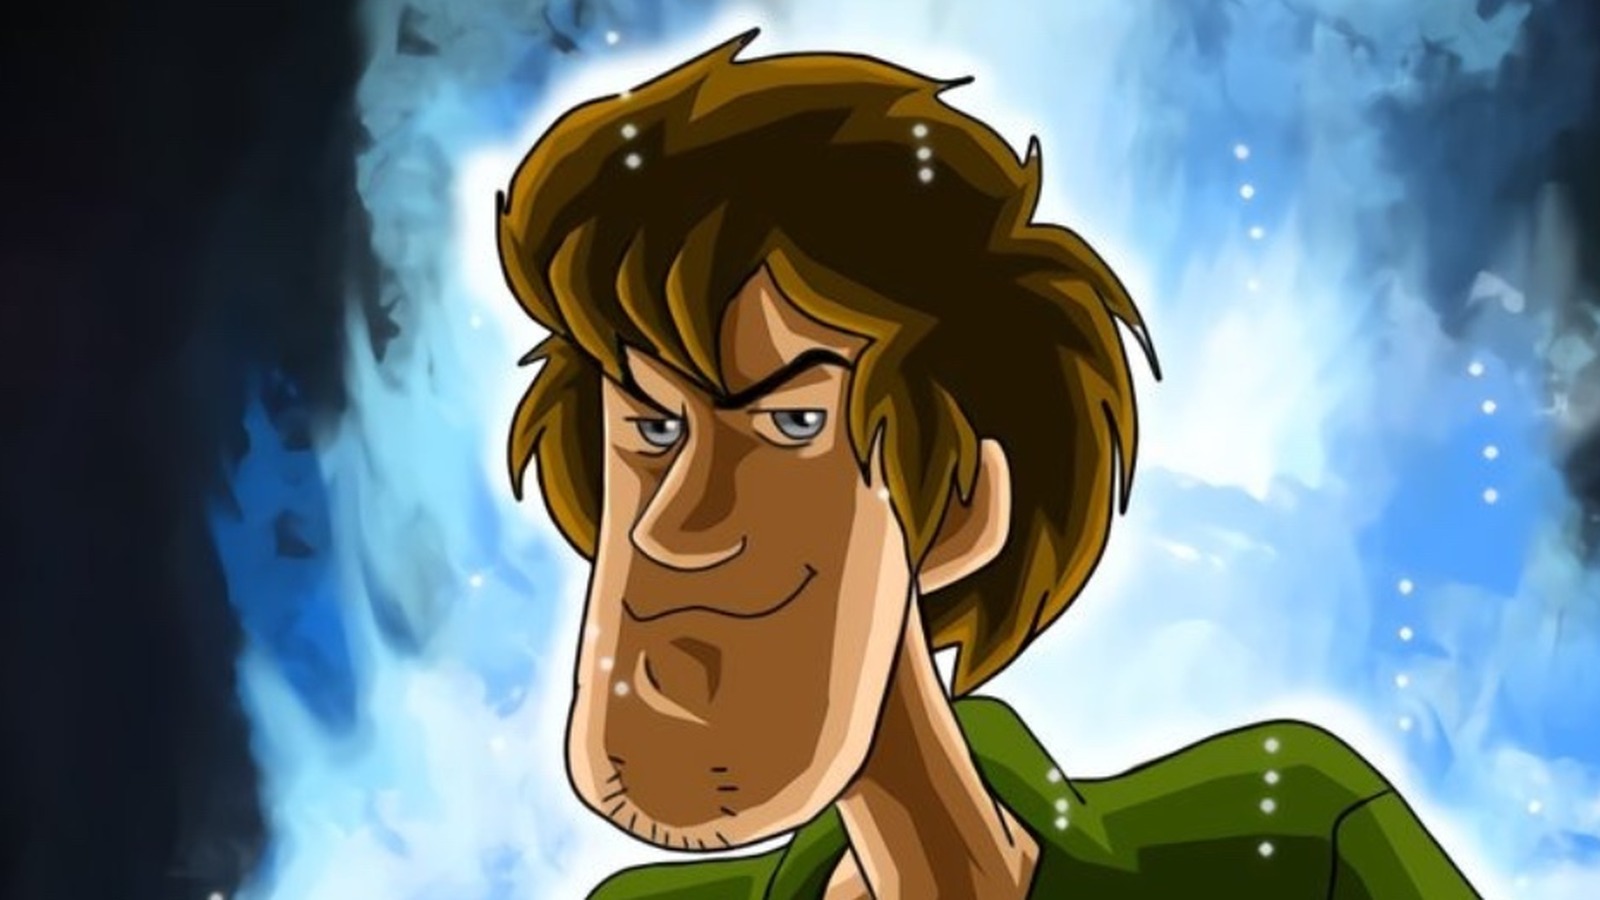 Shaggy Anime Hair! Every Hair is Rigged! COMMERCIAL/PERSONAL